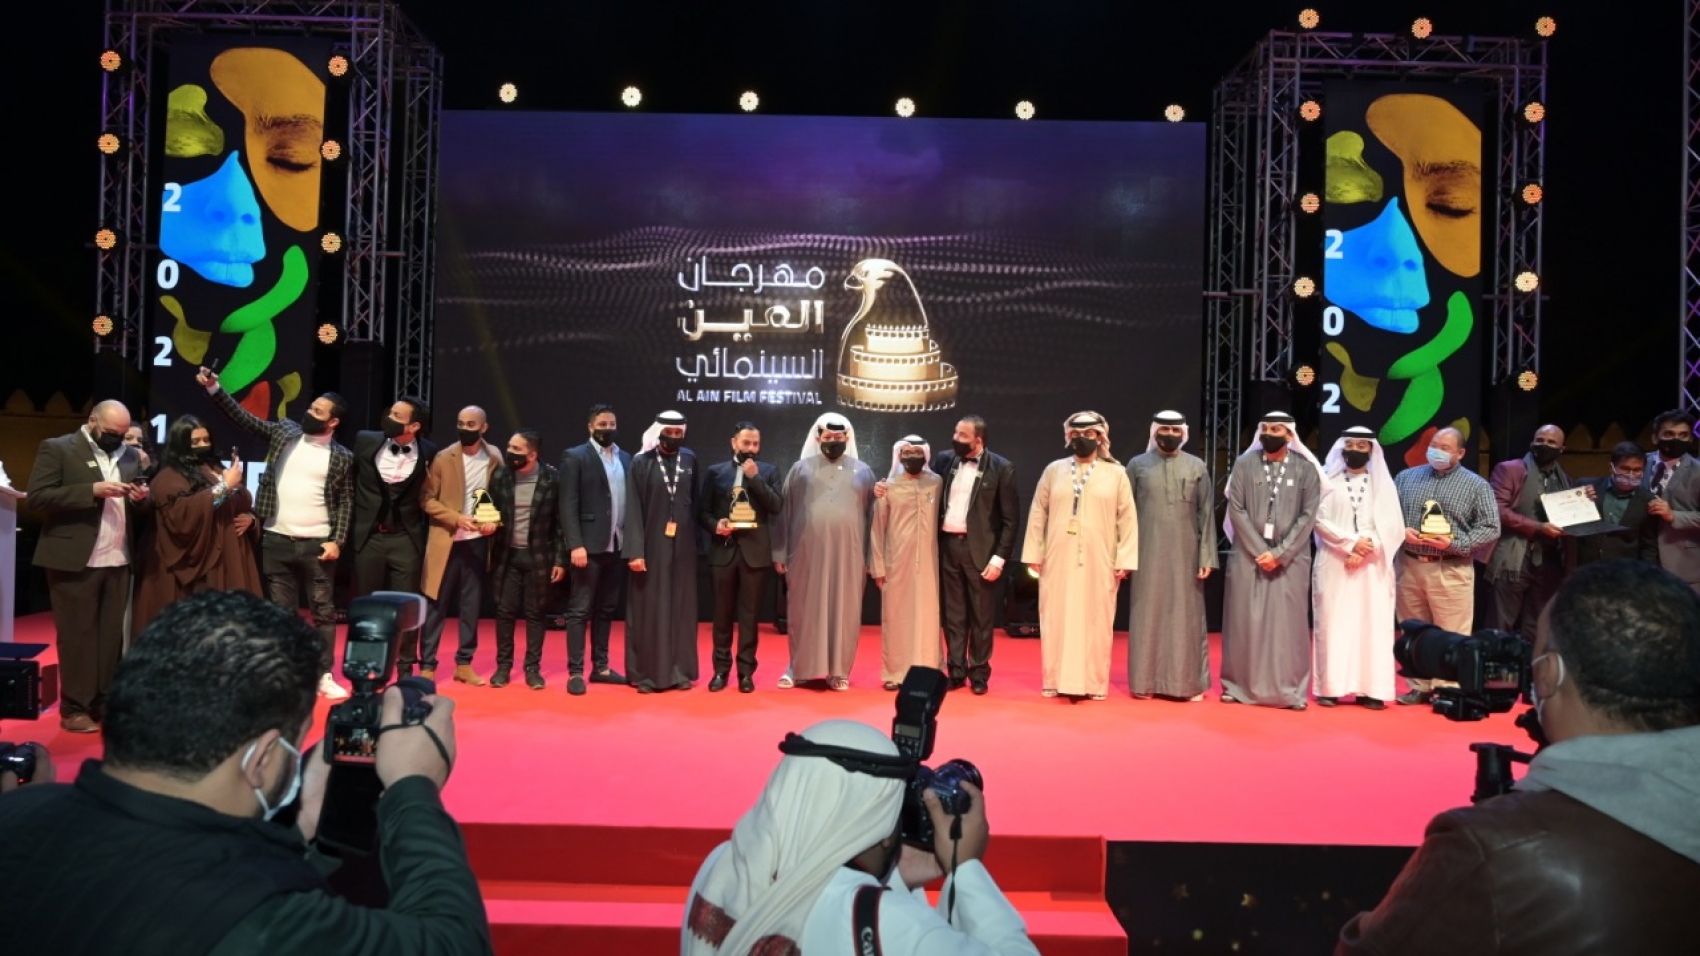 "Al Ain Film Festival" brings down the curtain on its 3rd Edition with the distribution of "Falcon" awards